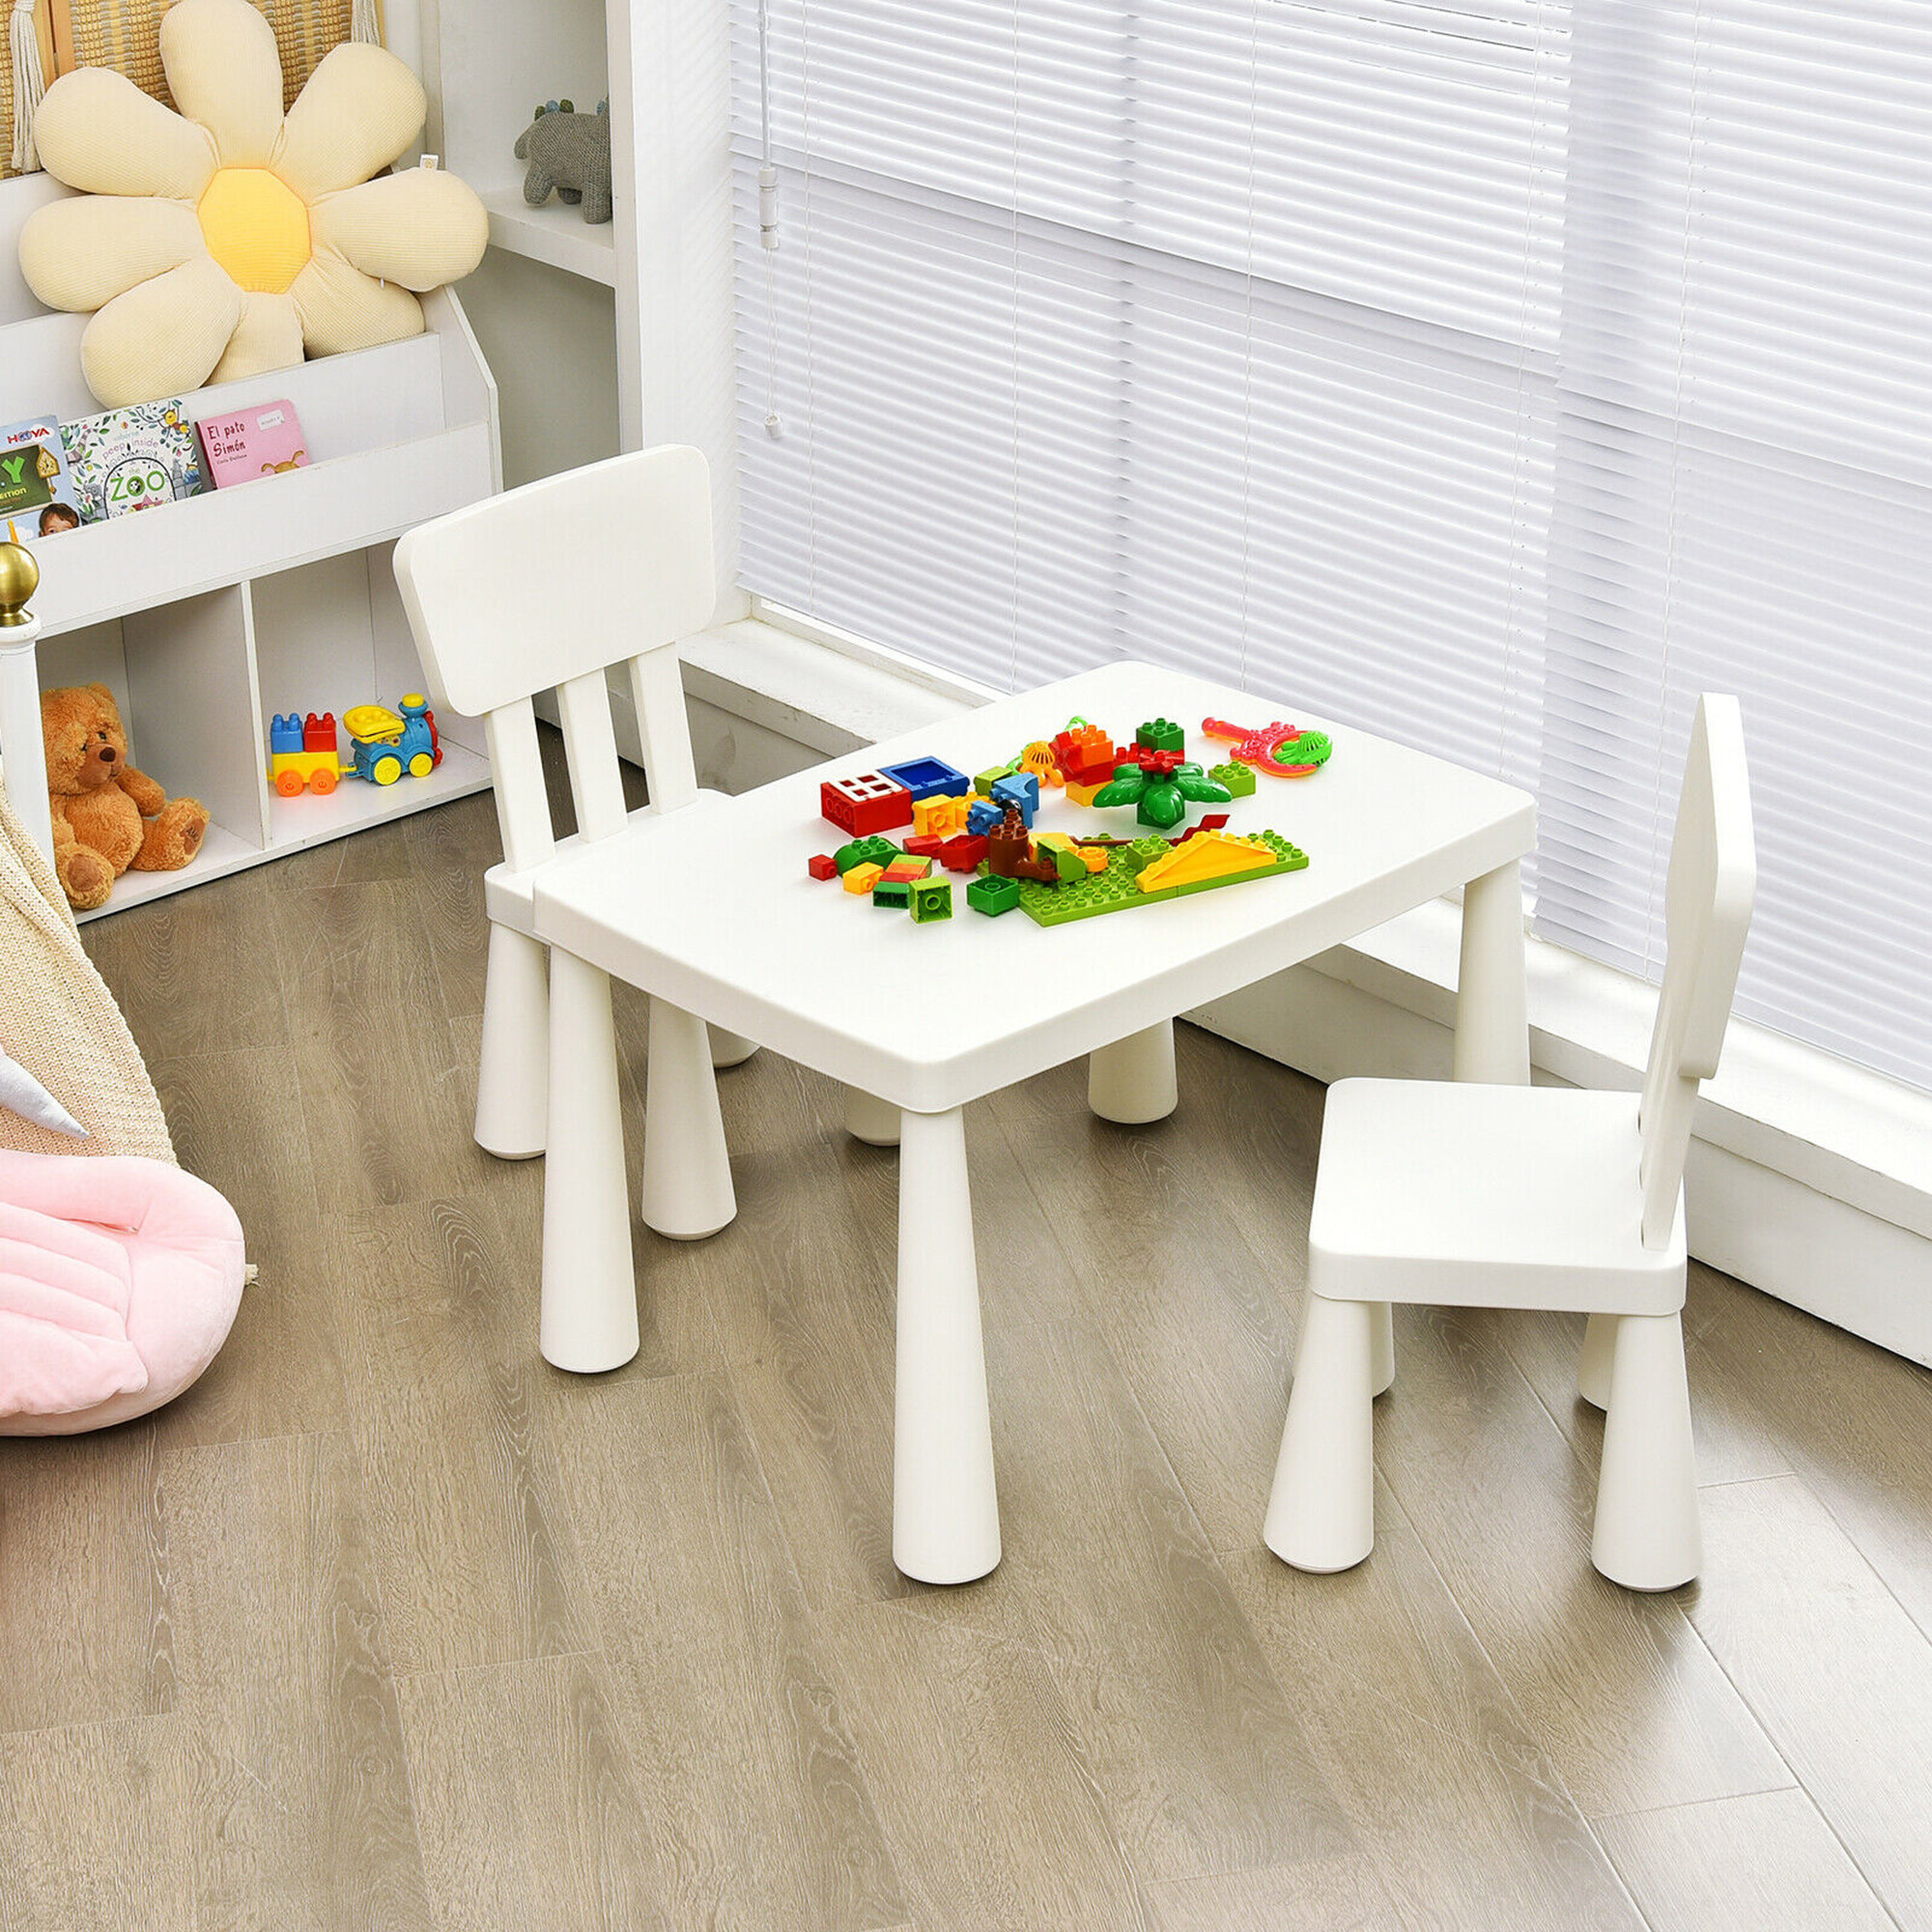 Small Nilo® Toddler Activity Table